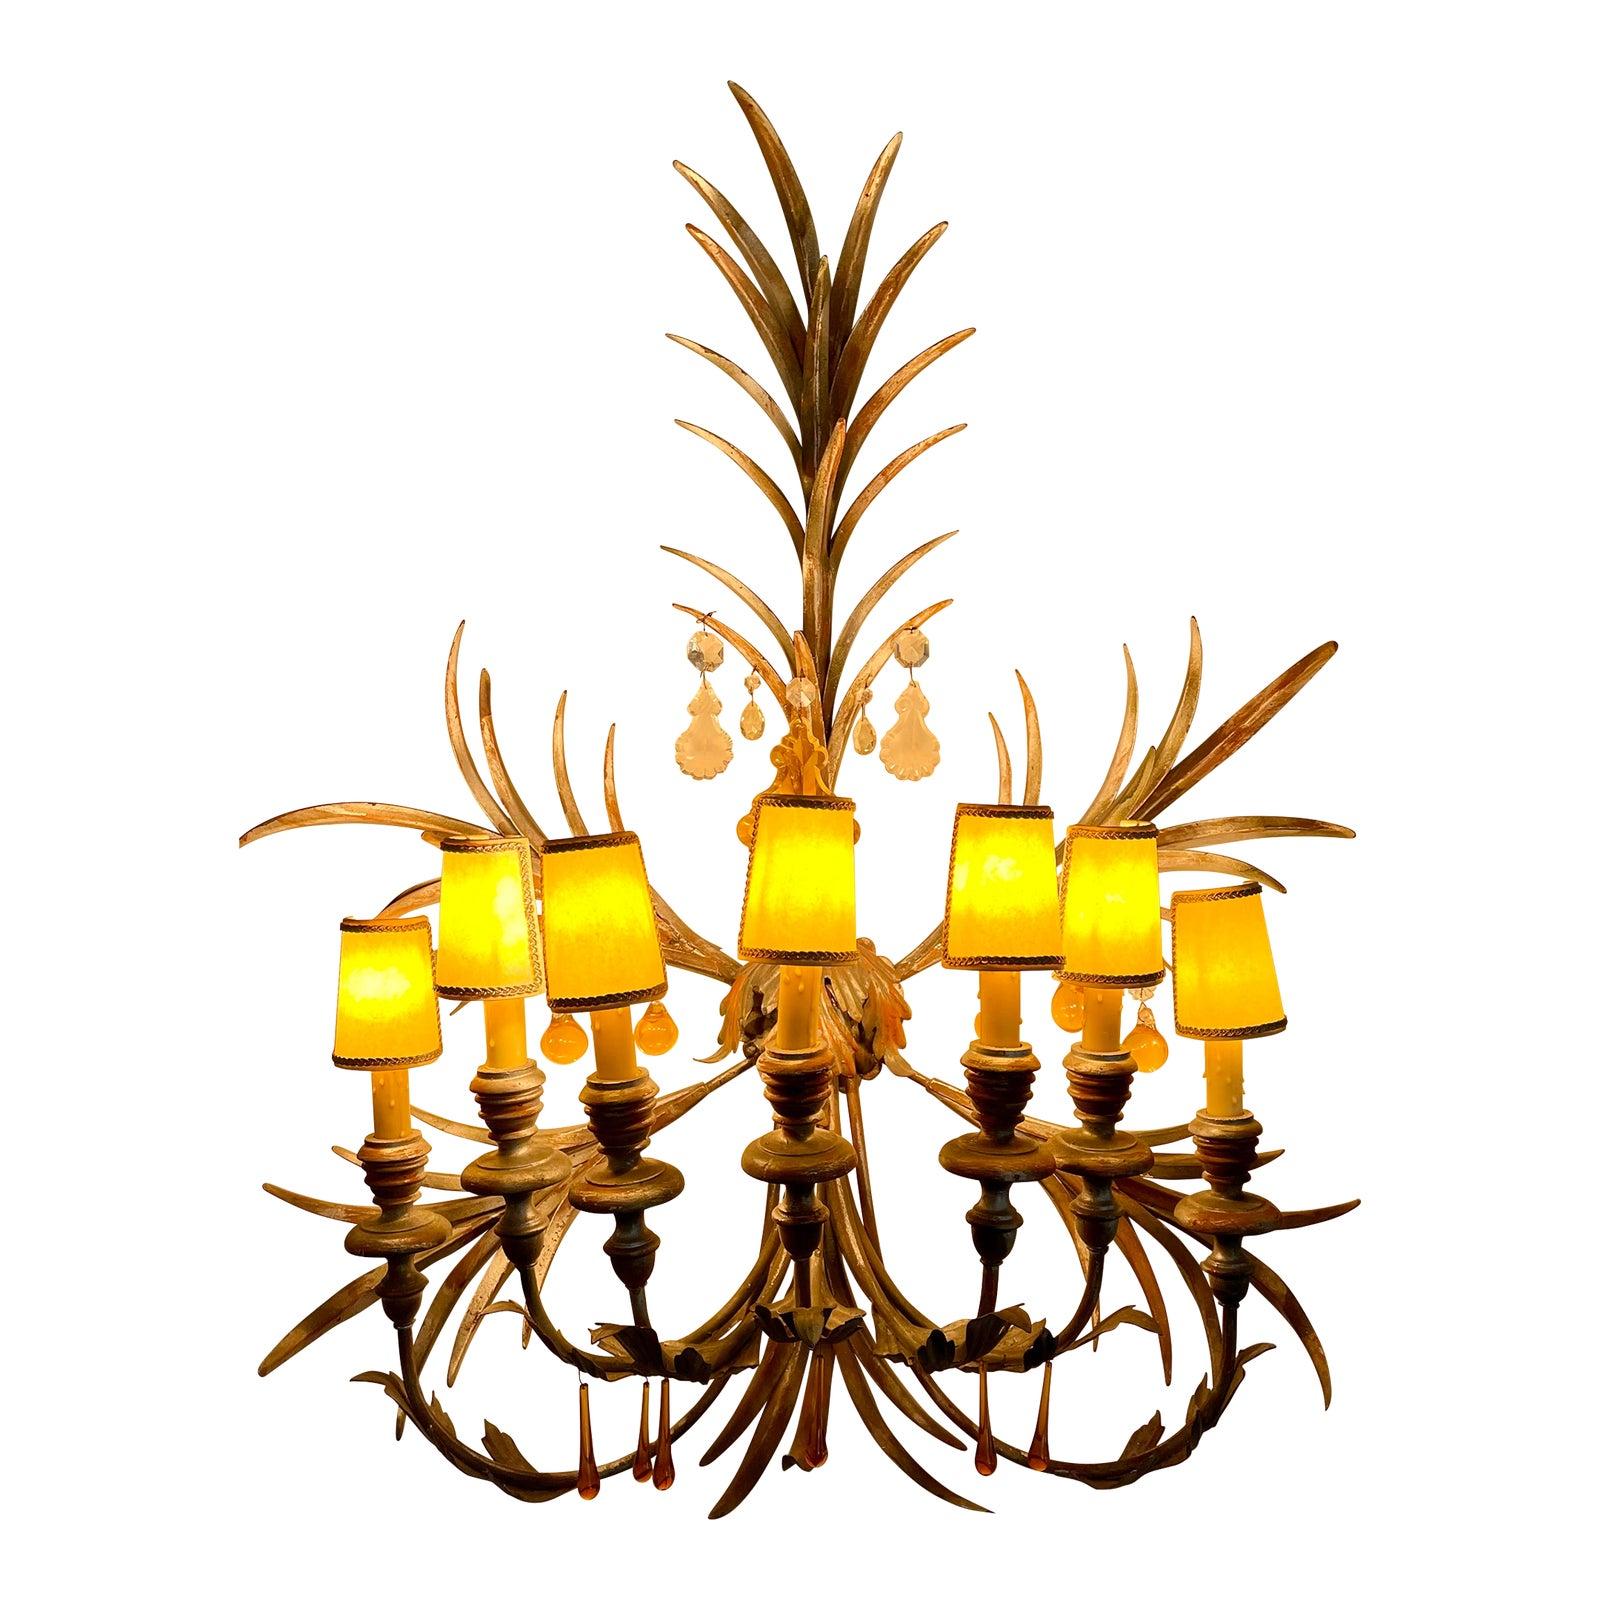 Hollywood Regency Pair of Mid-Century Tony Duquette Venetian Light Sconce, Mid-20th Century For Sale